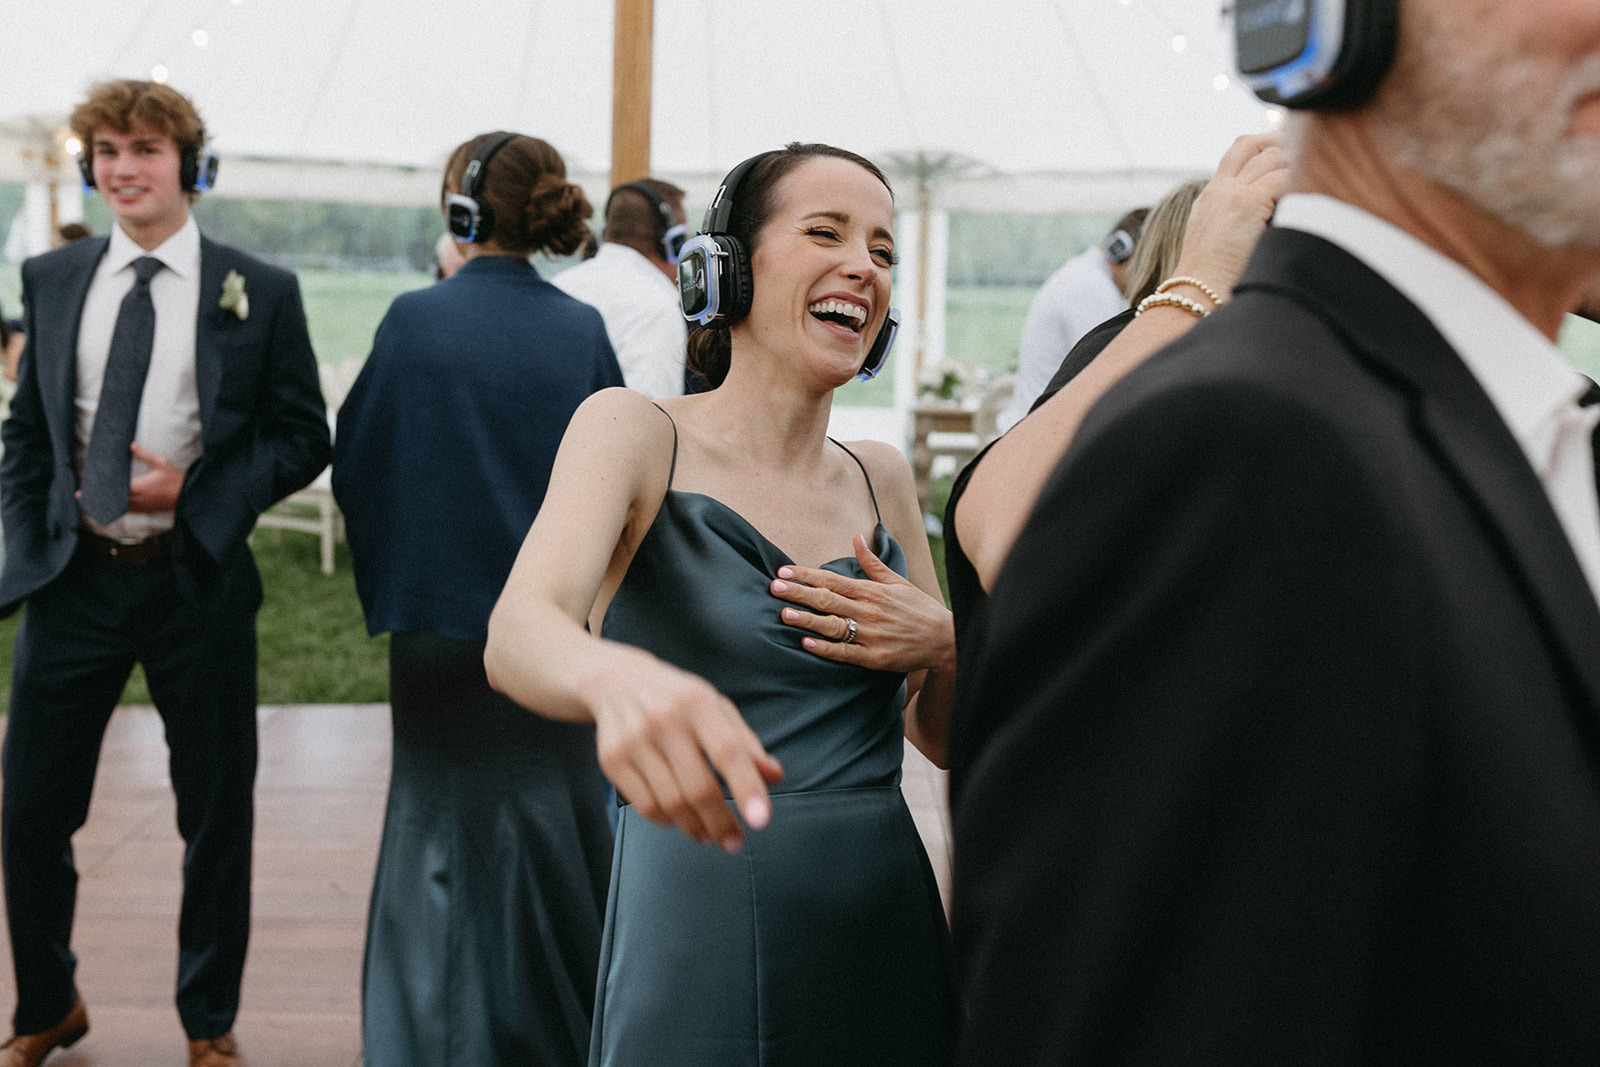 A bridesmaid wearing a slate blue bridesmaid dress is dancing with other wedding guests during a silent disco reception
